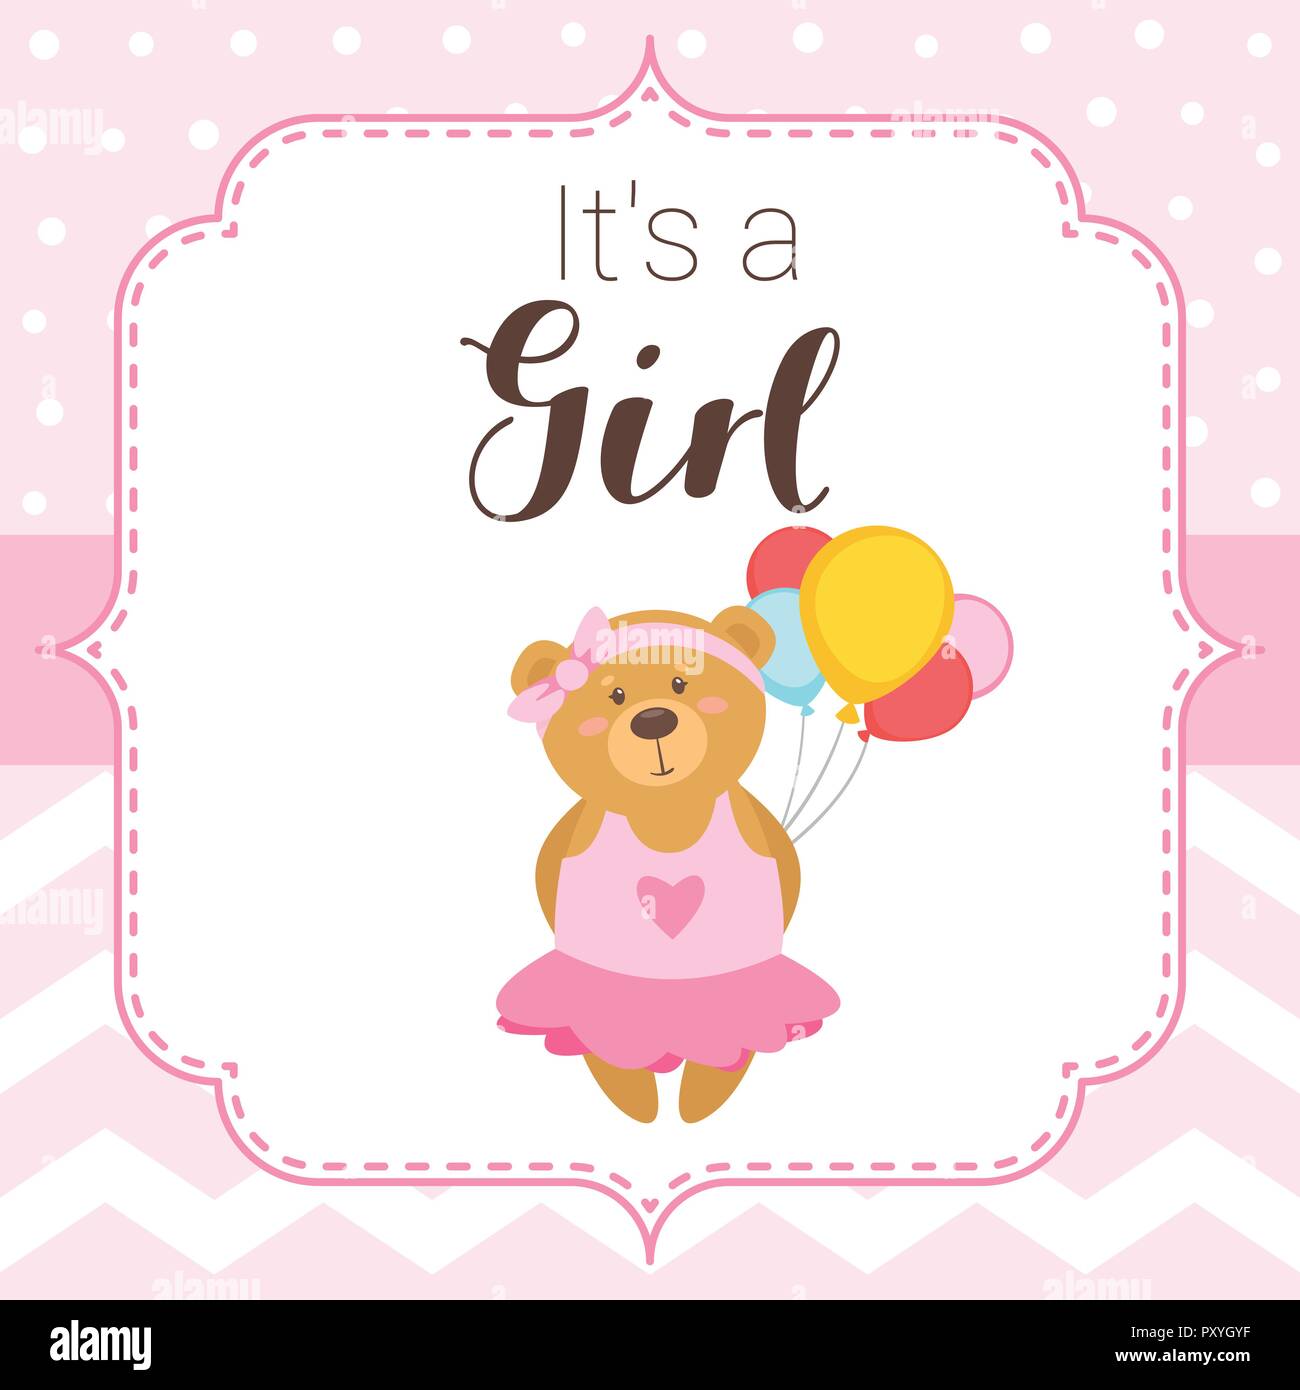 Vector cartoon style illustration of Baby shower invitation. Baby girl celebration greeting card template. Brown teddy bear holding balloons on pink p Stock Vector